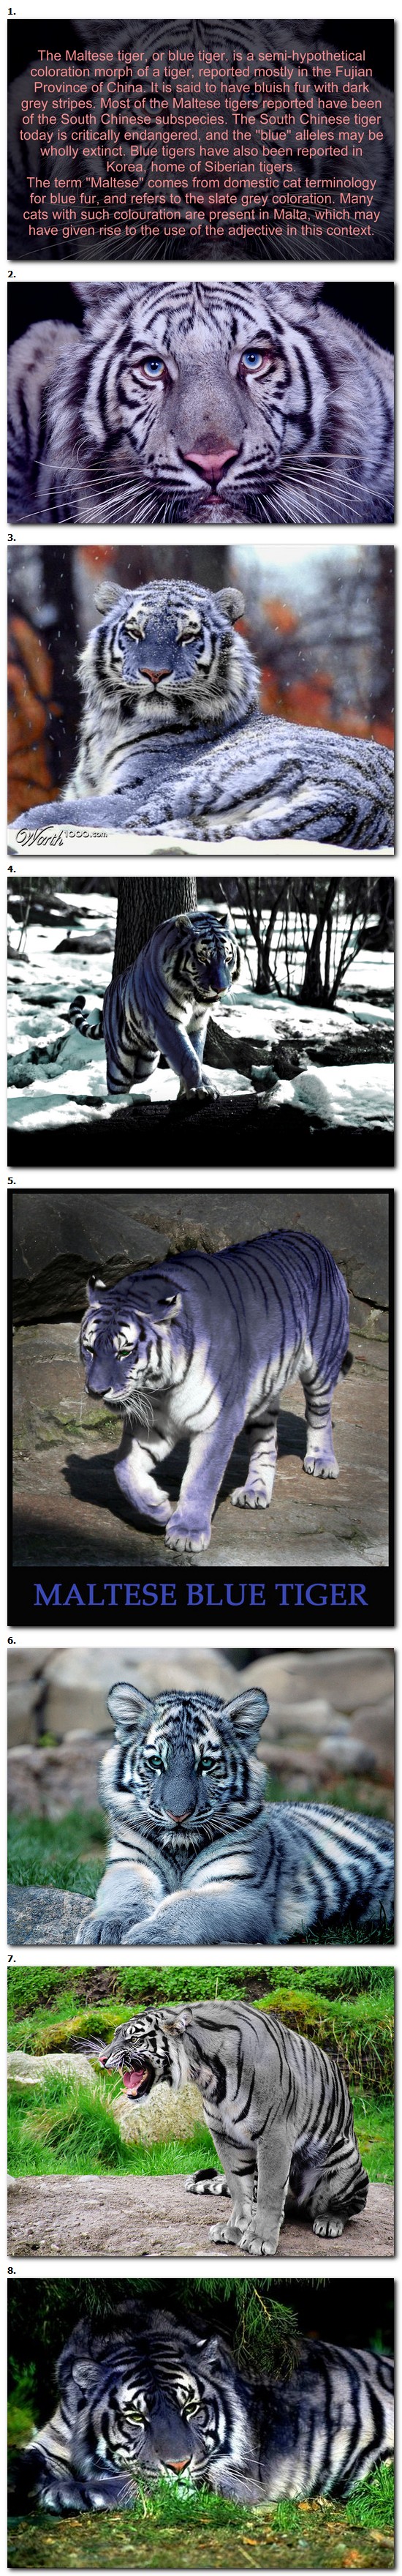 Harry R. Caldwell was a Methodist missionary to southern China. In Blue Tiger, first published in 1924, he writes about several of his adventures in that country.
Of particular interest, Caldwell offers the description of a fascinating creature, a blue-morph tiger, that he attempted to capture for science. Only a few blue tigers have been reported